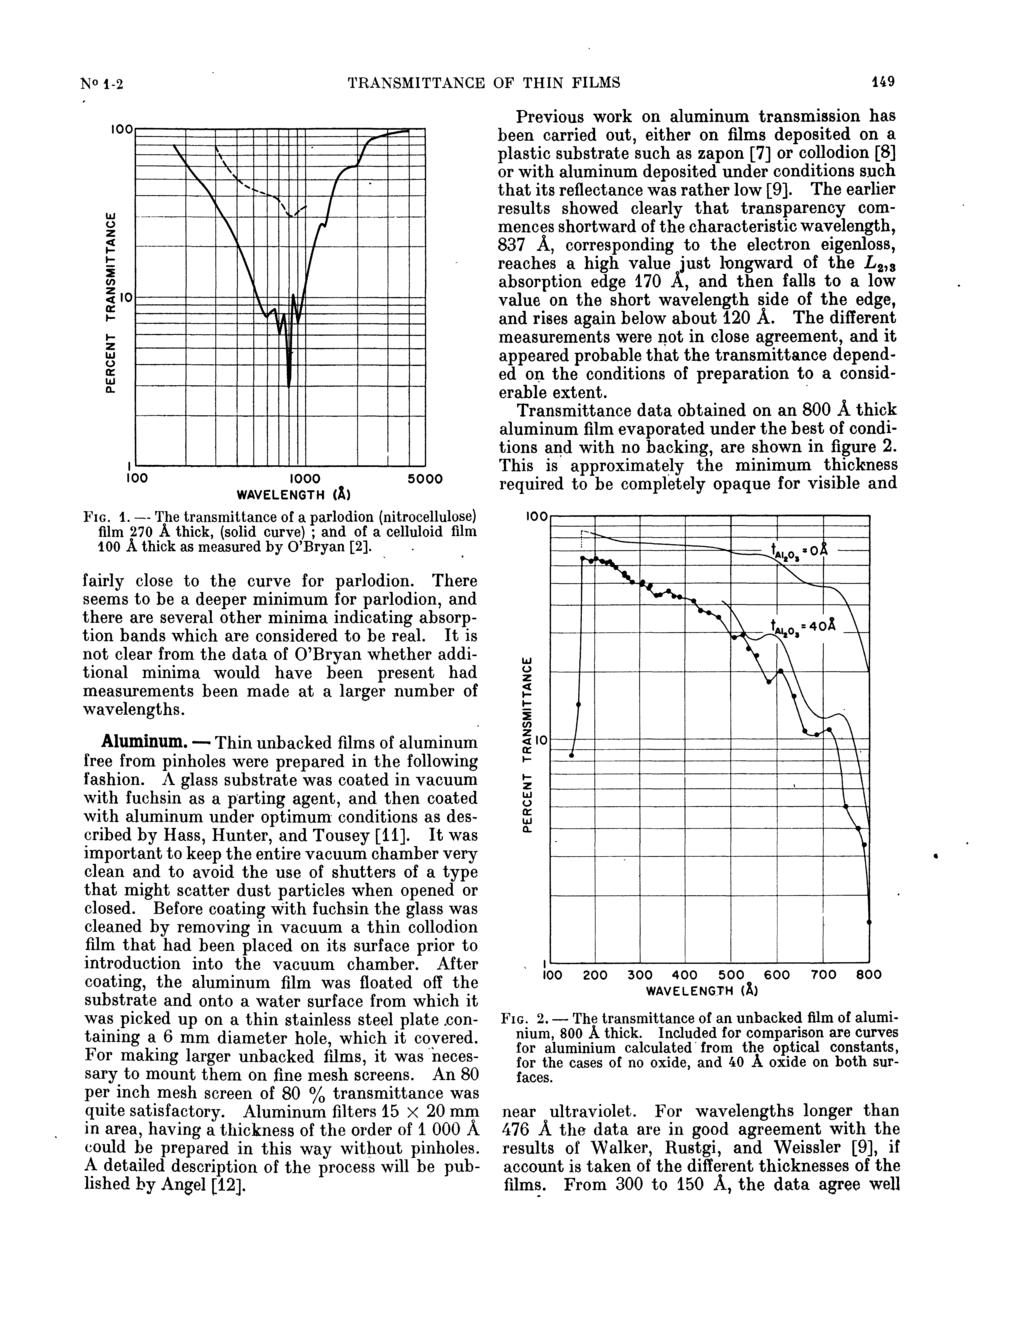 149 transmittance of a parlodion (nitrocellulose) film 270 A thick, (solid curve) ; and of a celluloid film 100 A thick as measured by O Bryan [2].. FIG. 1. fairly close to the curve for parlodion.